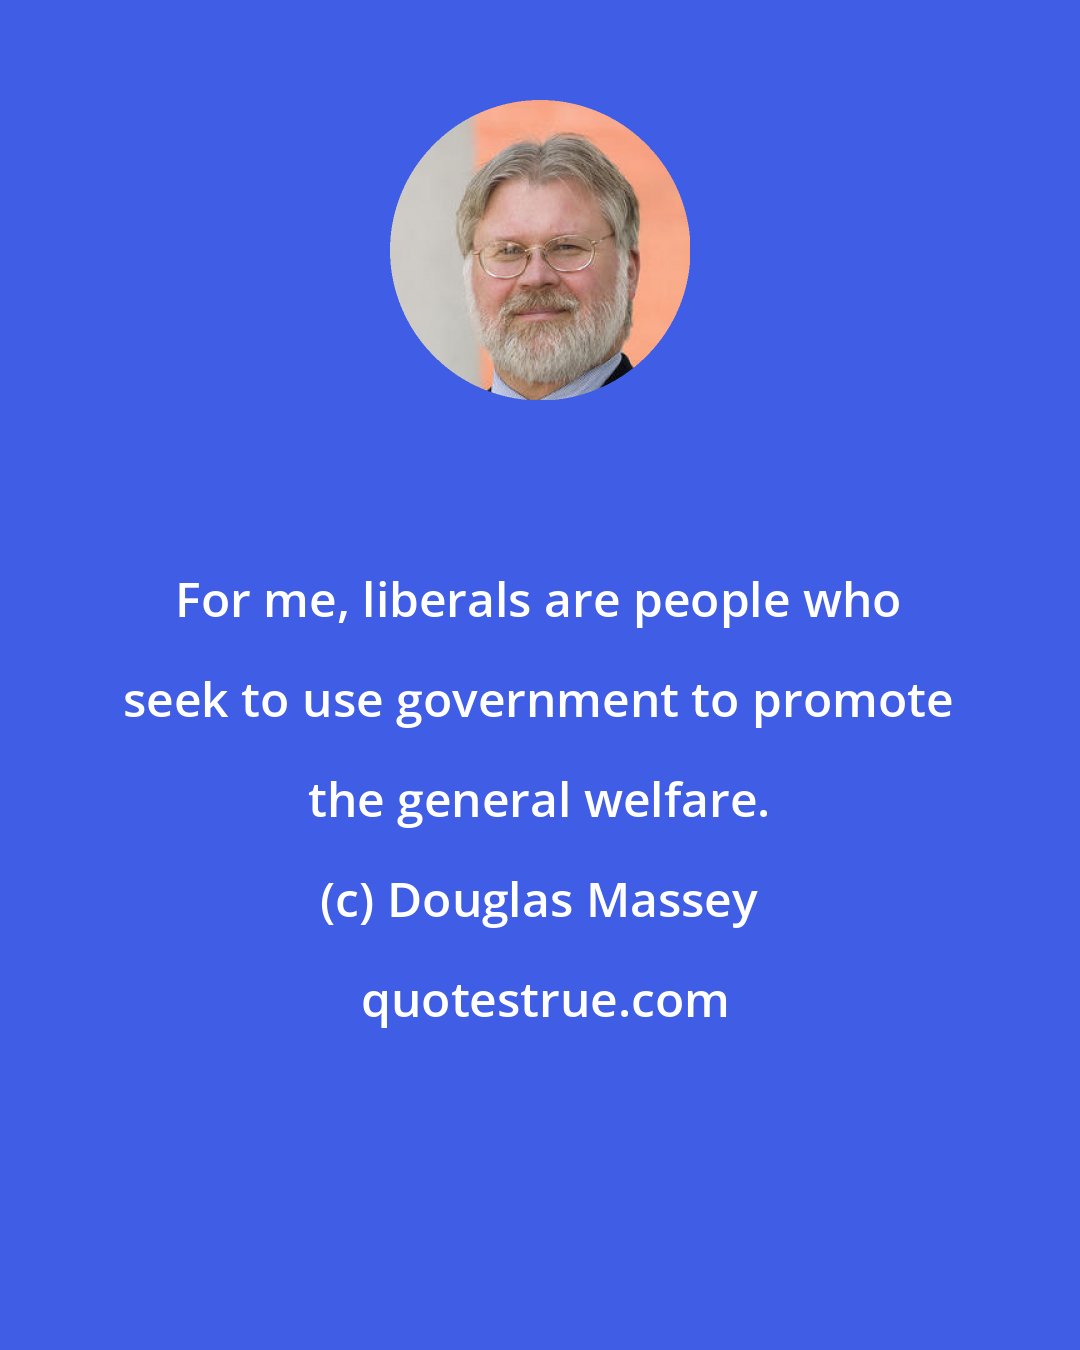 Douglas Massey: For me, liberals are people who seek to use government to promote the general welfare.